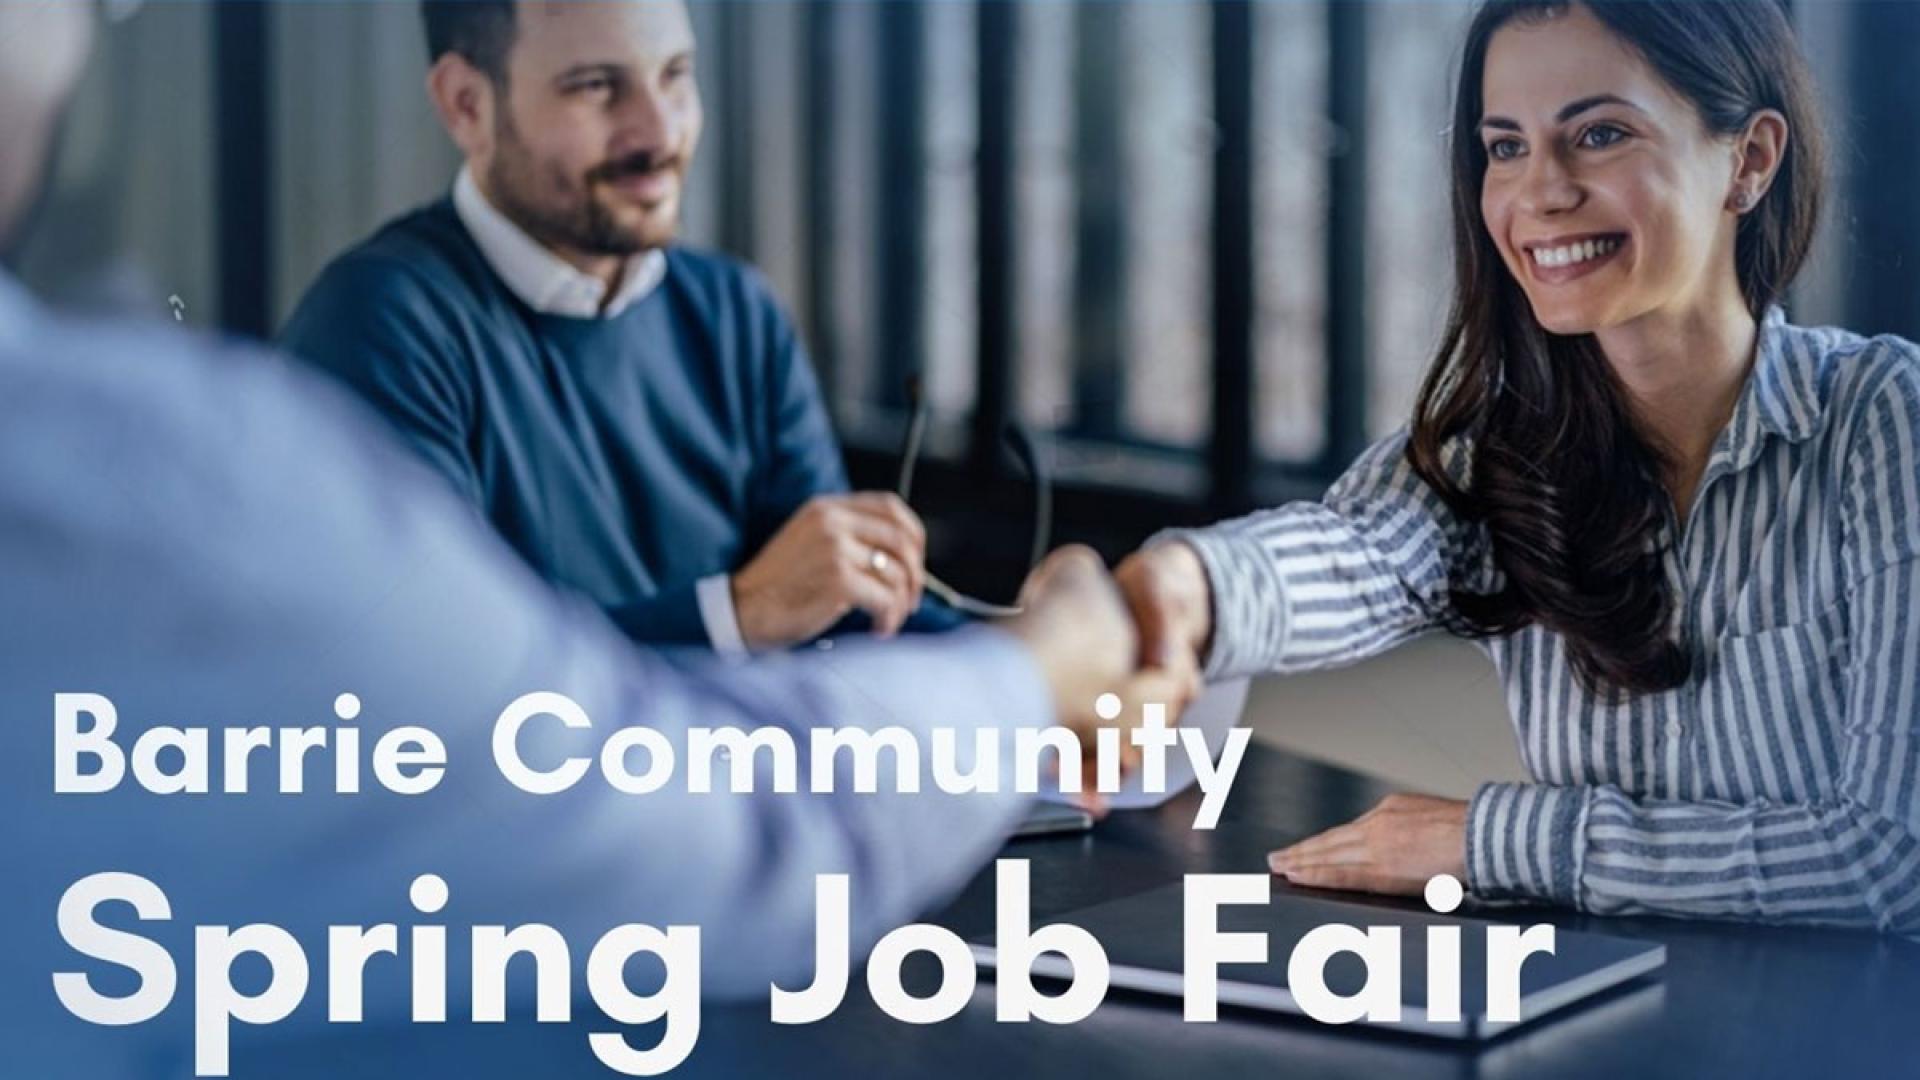 People shaking hands | Text: Barrie Community Spring Job Fair 